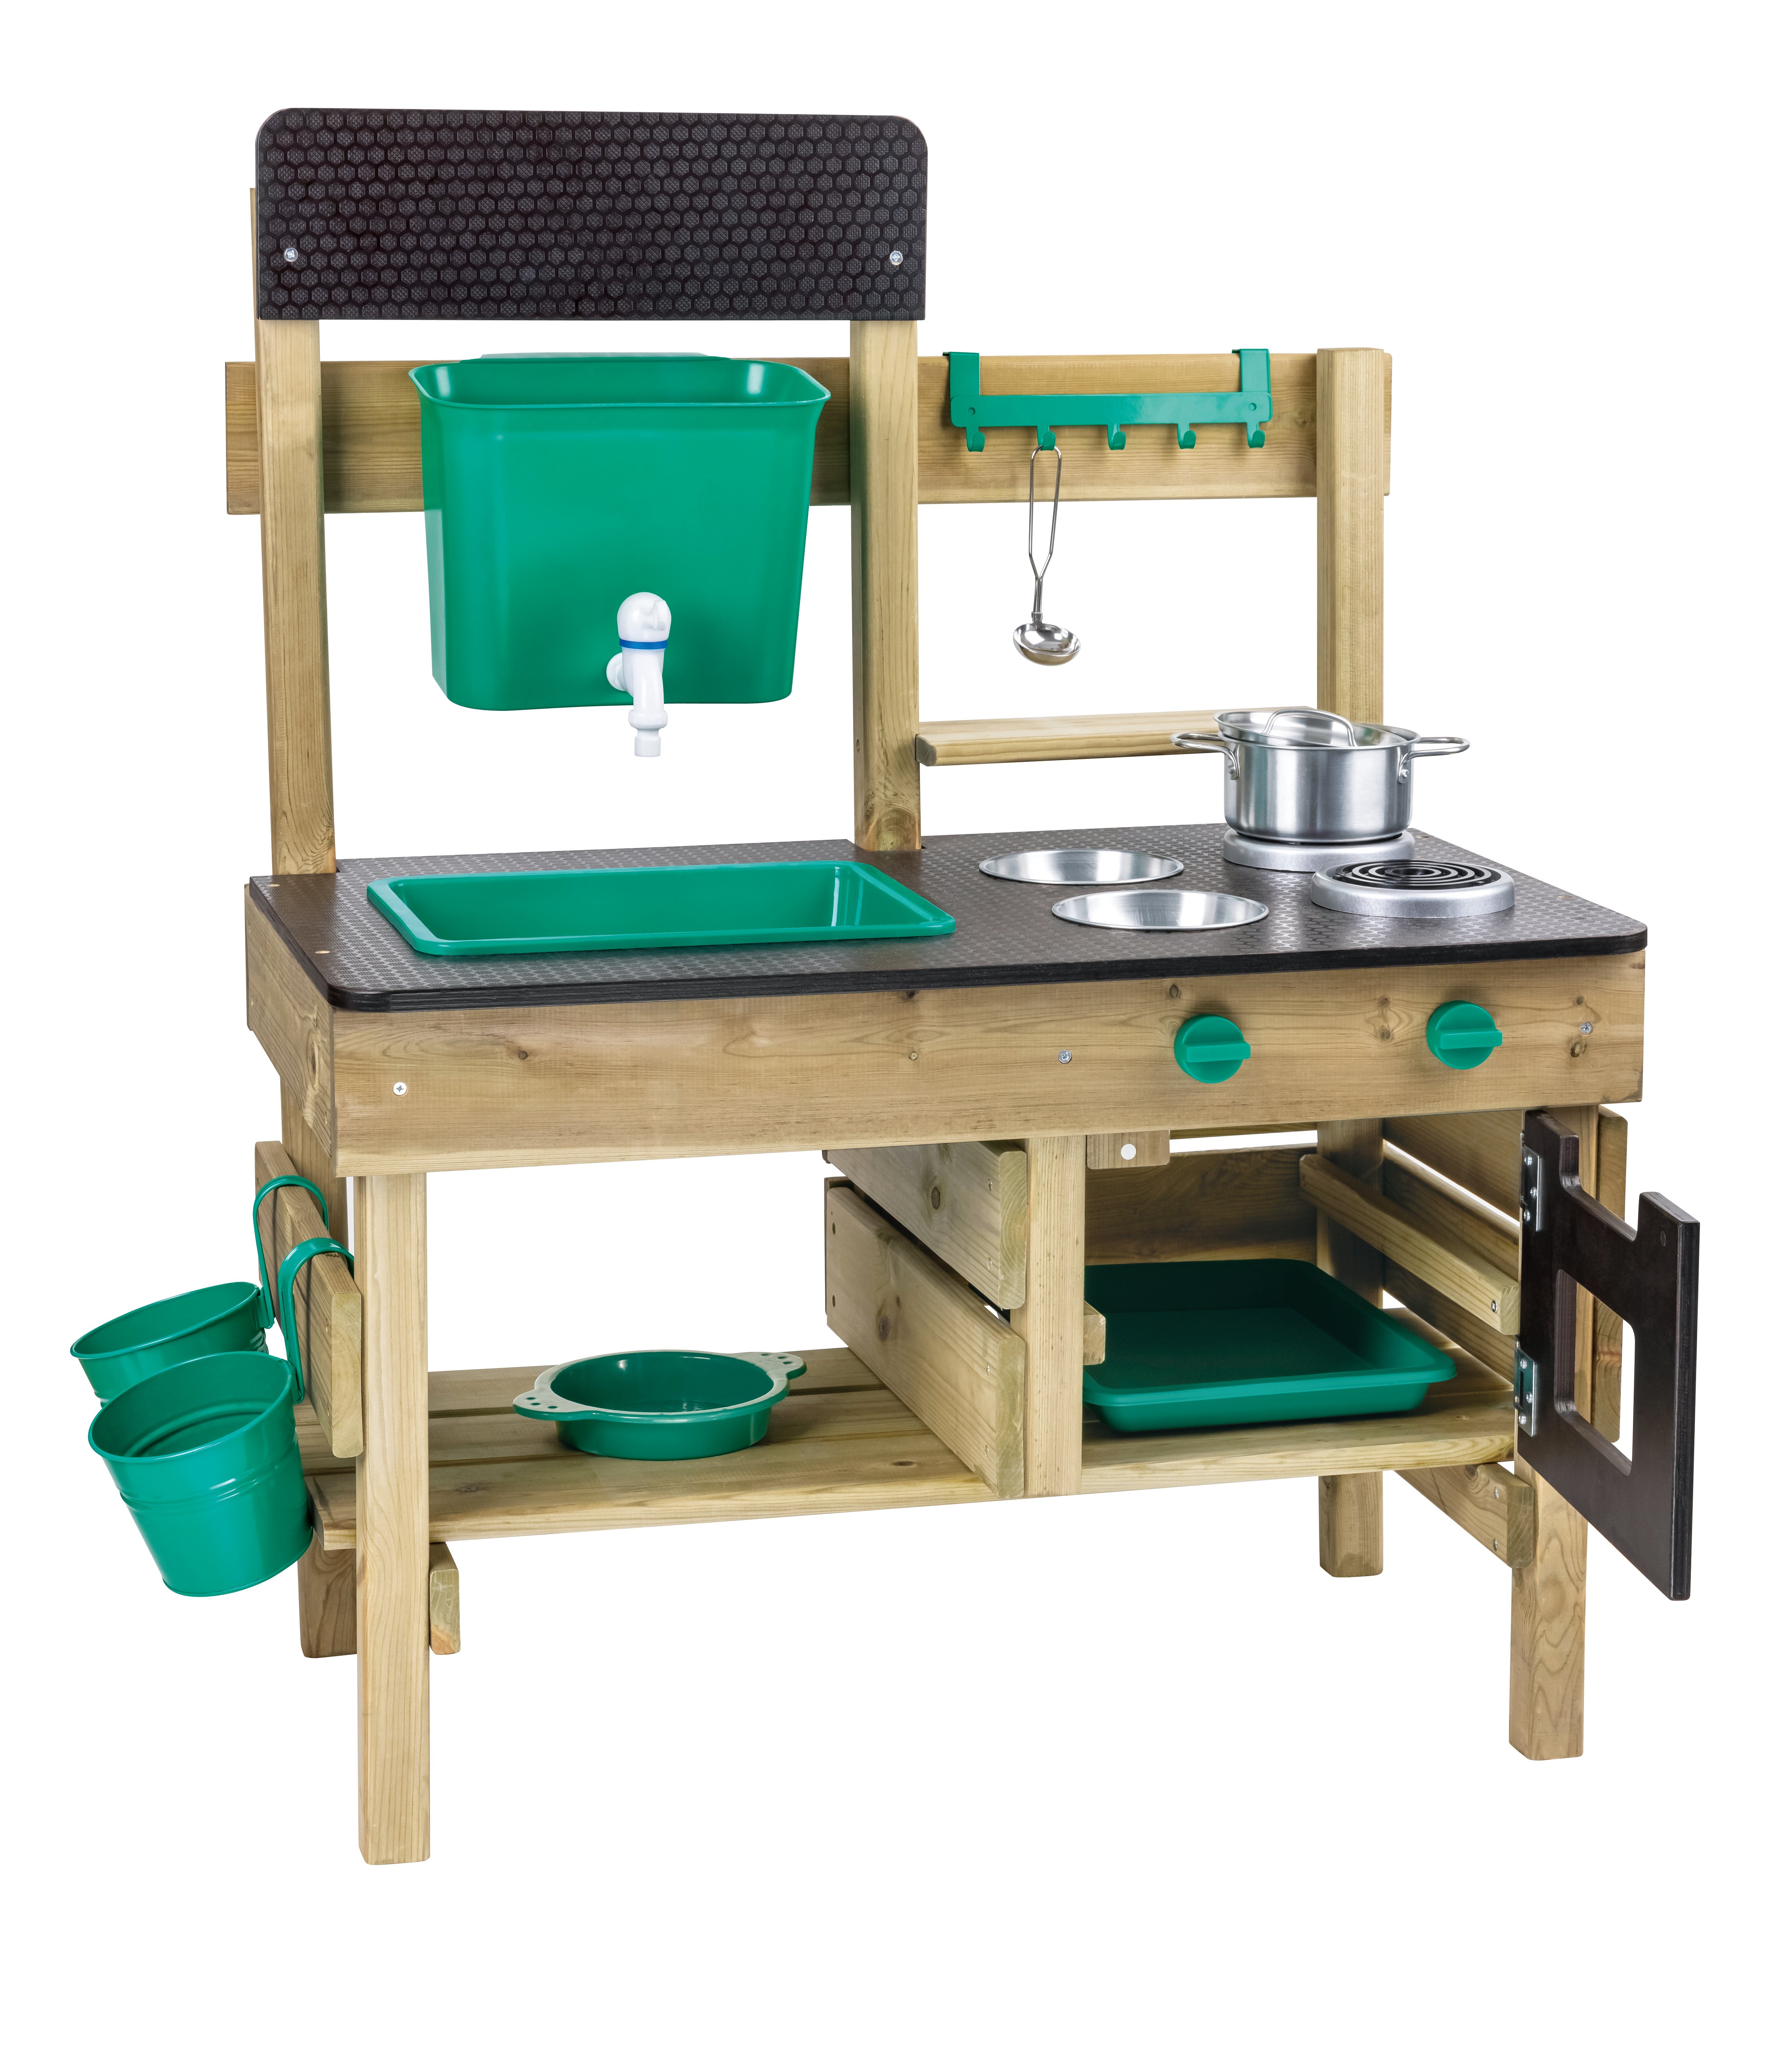 Wooden Outdoor Kitchen Playset w/ Accessories Ages 3+ Years